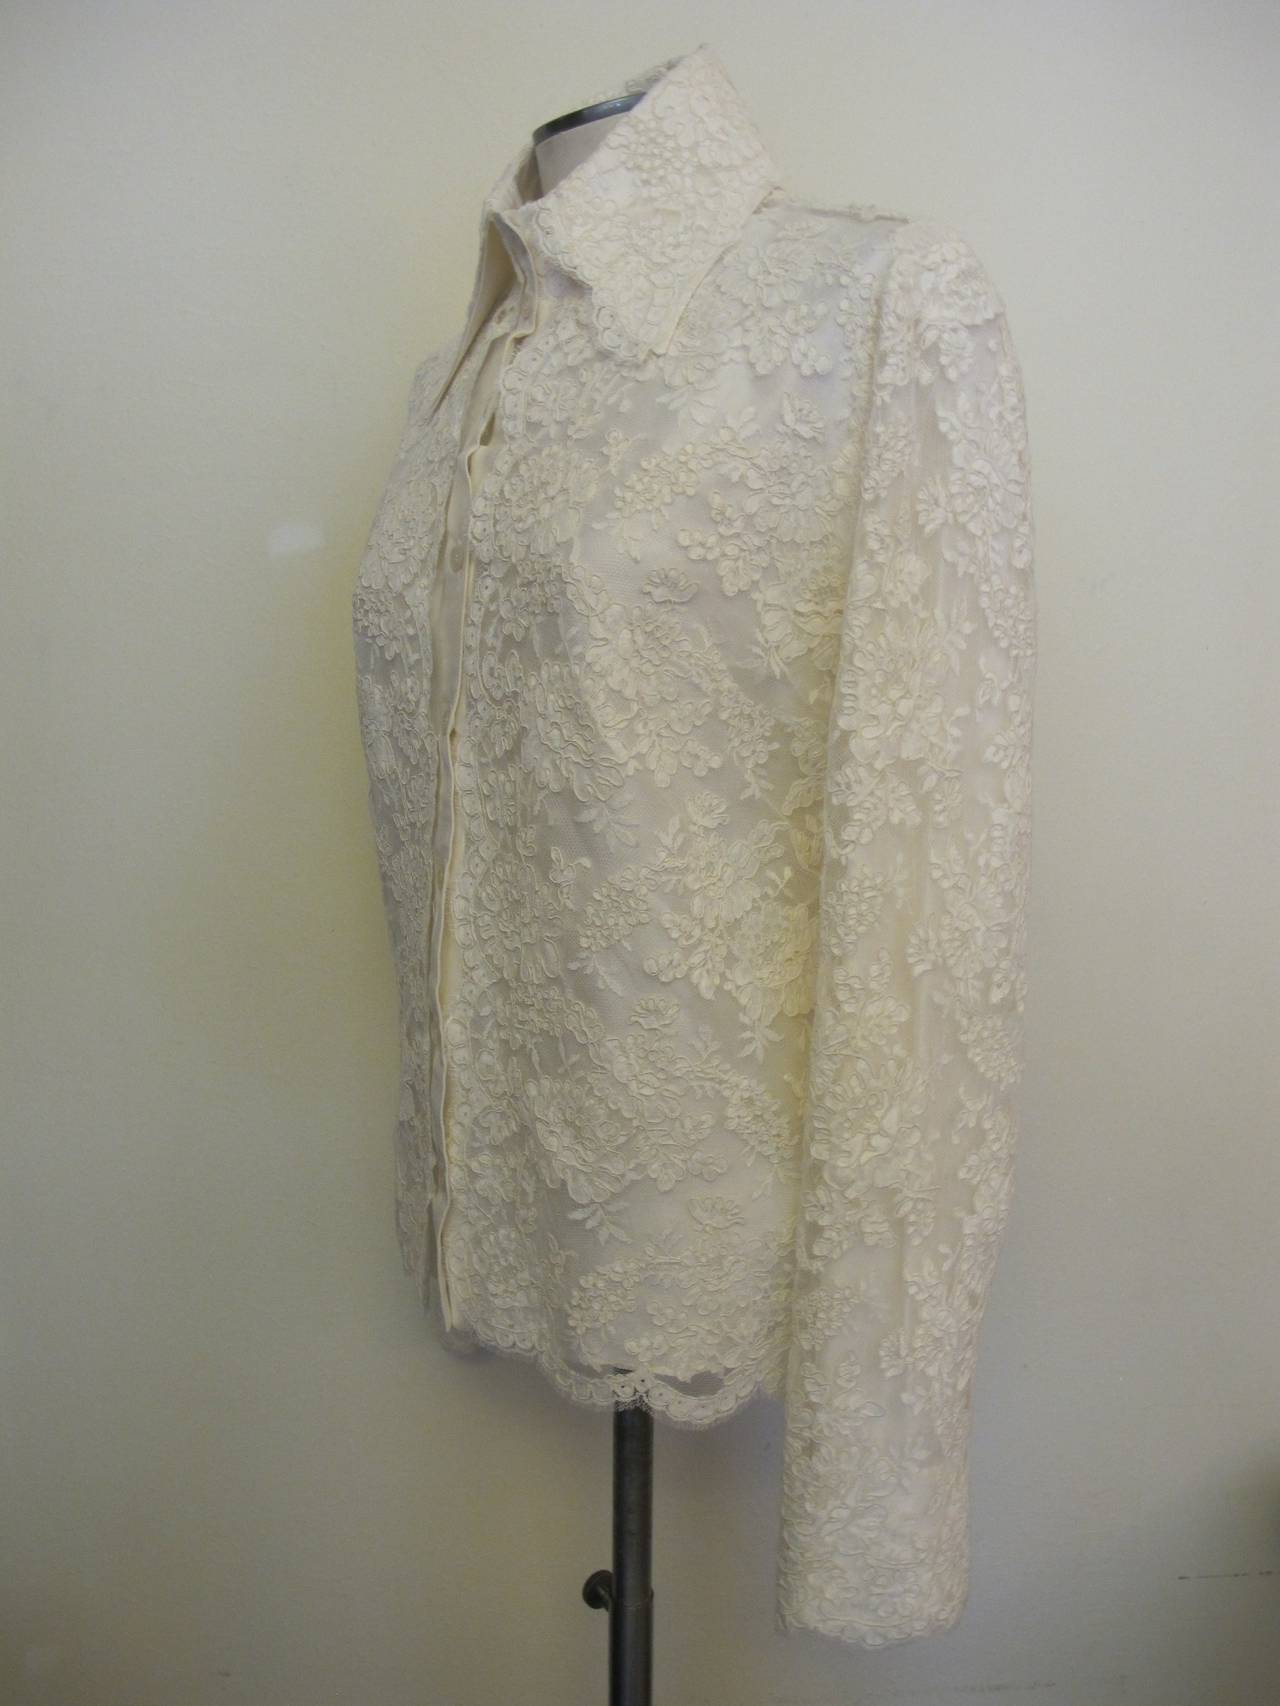 New Valentino Alençon lace blouse lined in white silk satin with scallops surrounding the sleeves, collar and bottom of blouse. Sleeve length measures 25.5 inches. Shoulder to shoulder measures 15.5 inches.